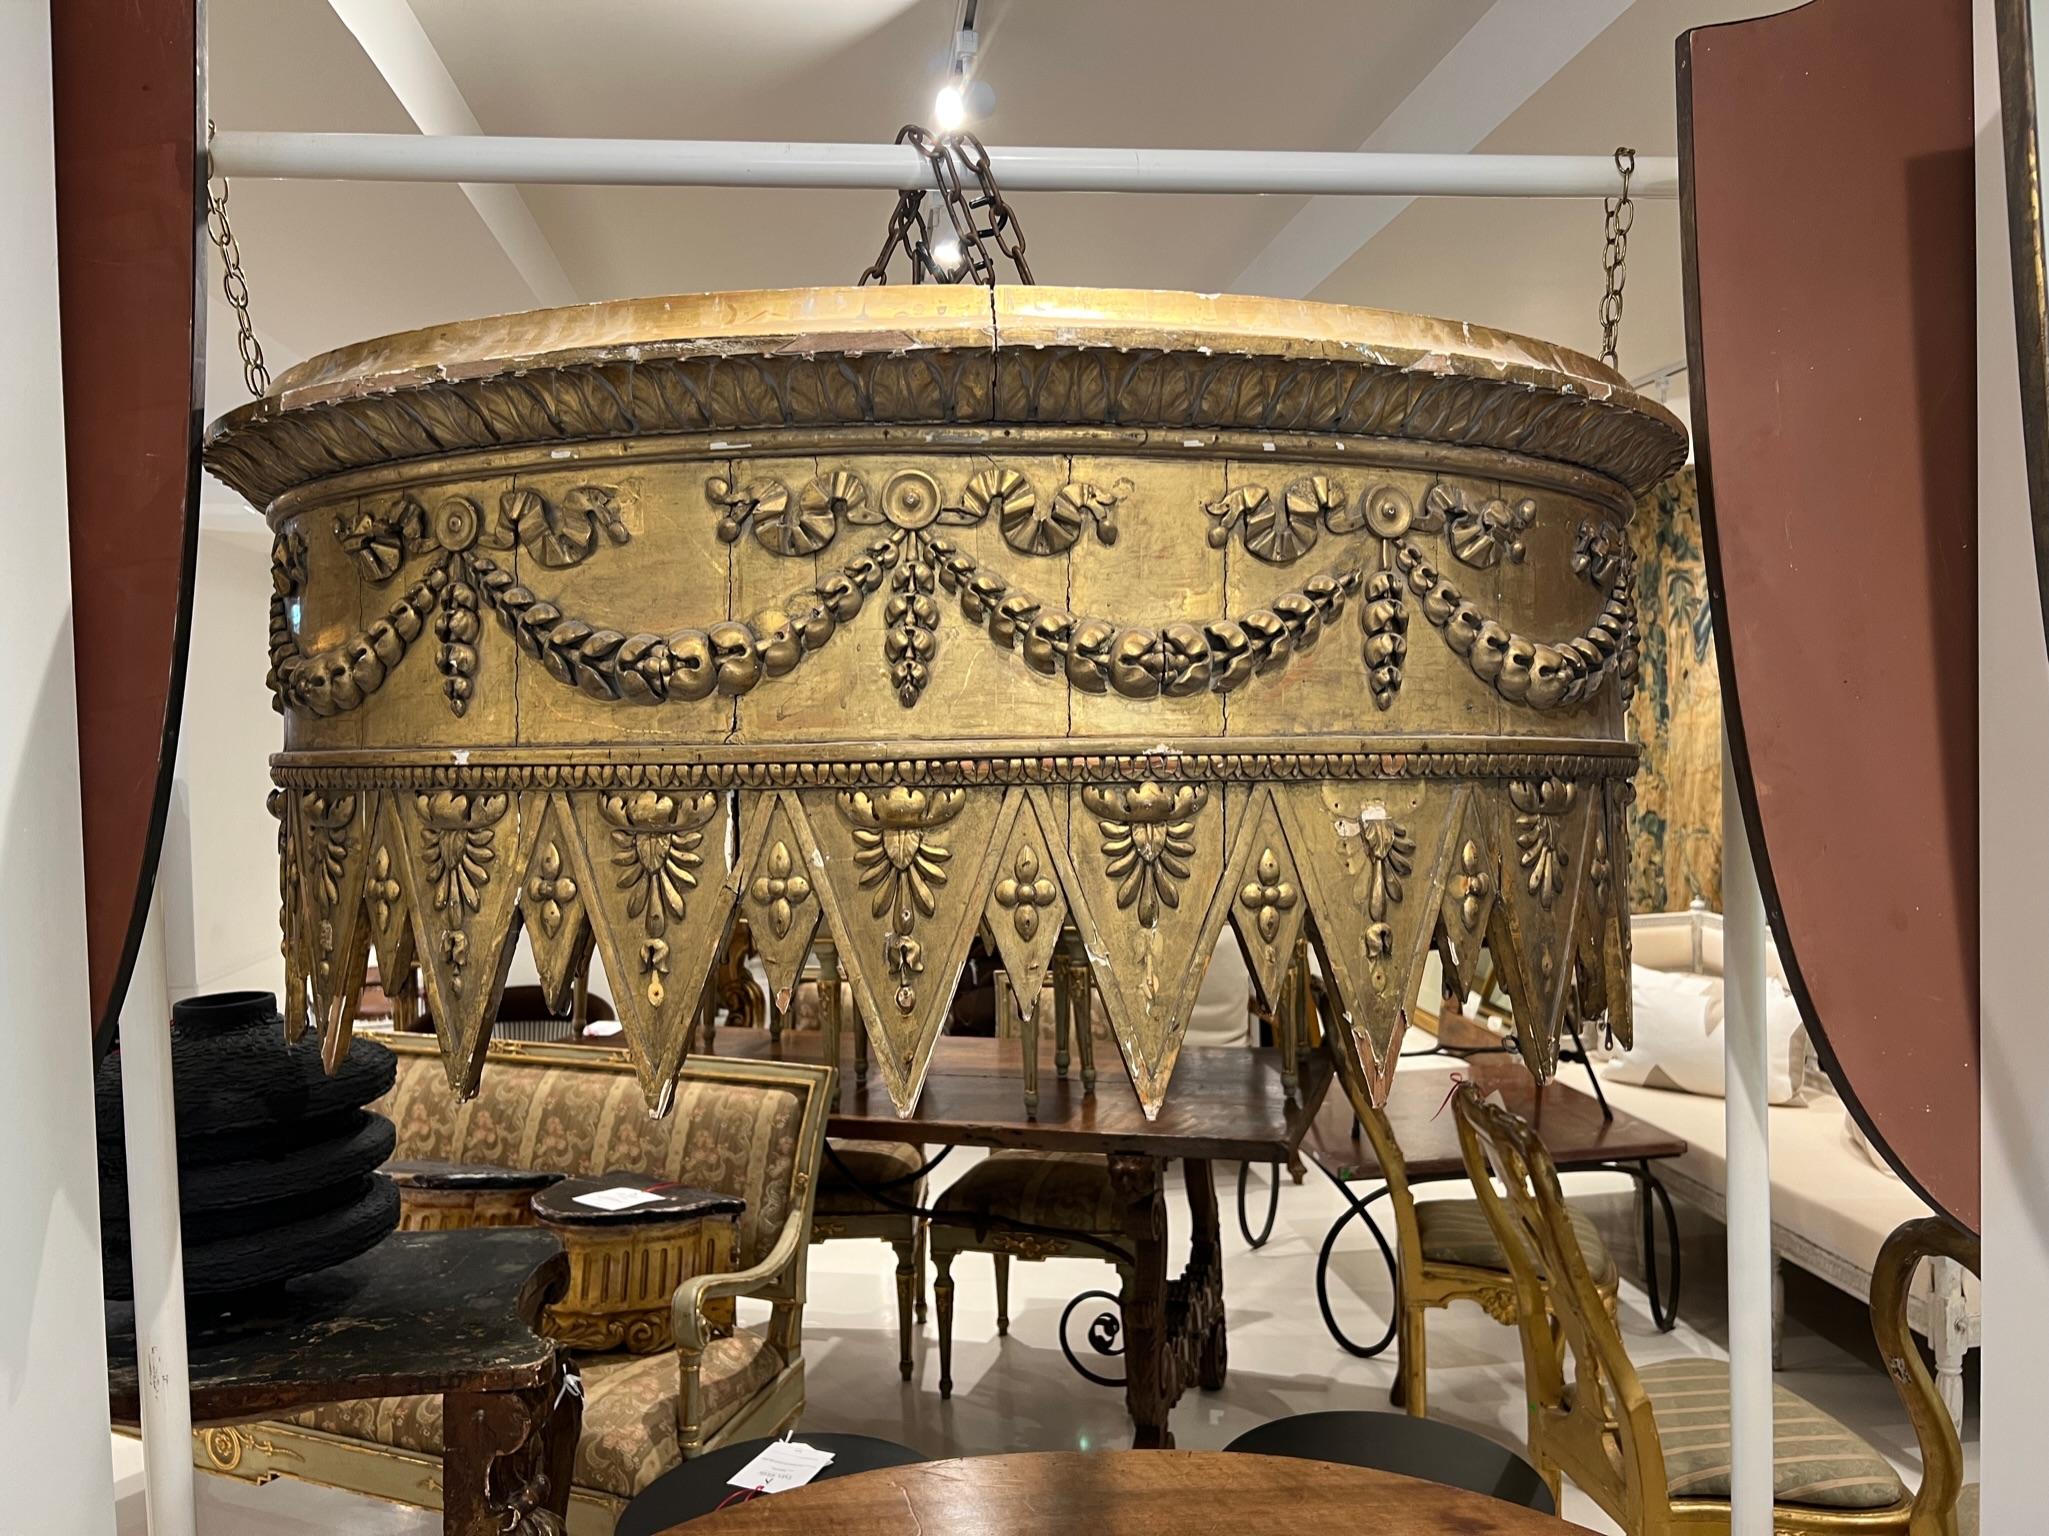 Also known as a baldacchino, baldaquin, or baldachin. Very large 18th Century architectural piece that would have been suspended from the ceiling over an altar but would be a stunning canopy over a bed.  There are hooks on the sides for curtains. 